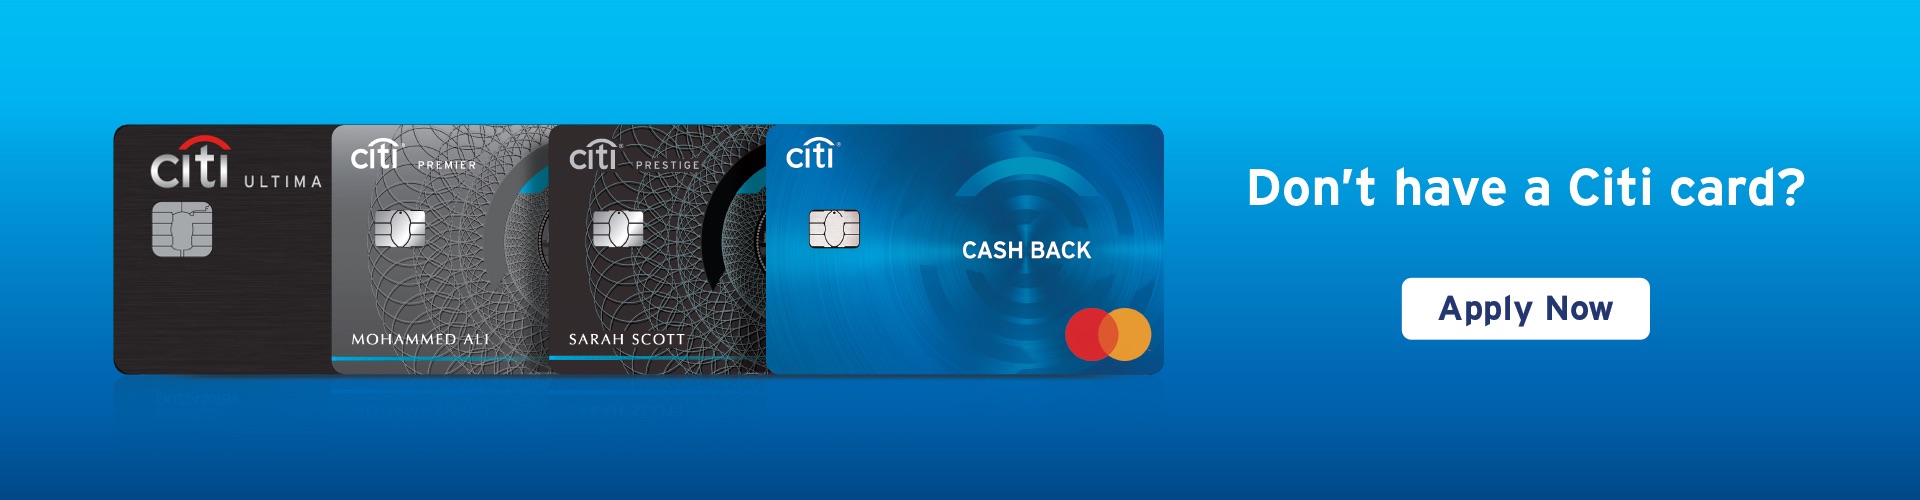 Don't have a Citi card?